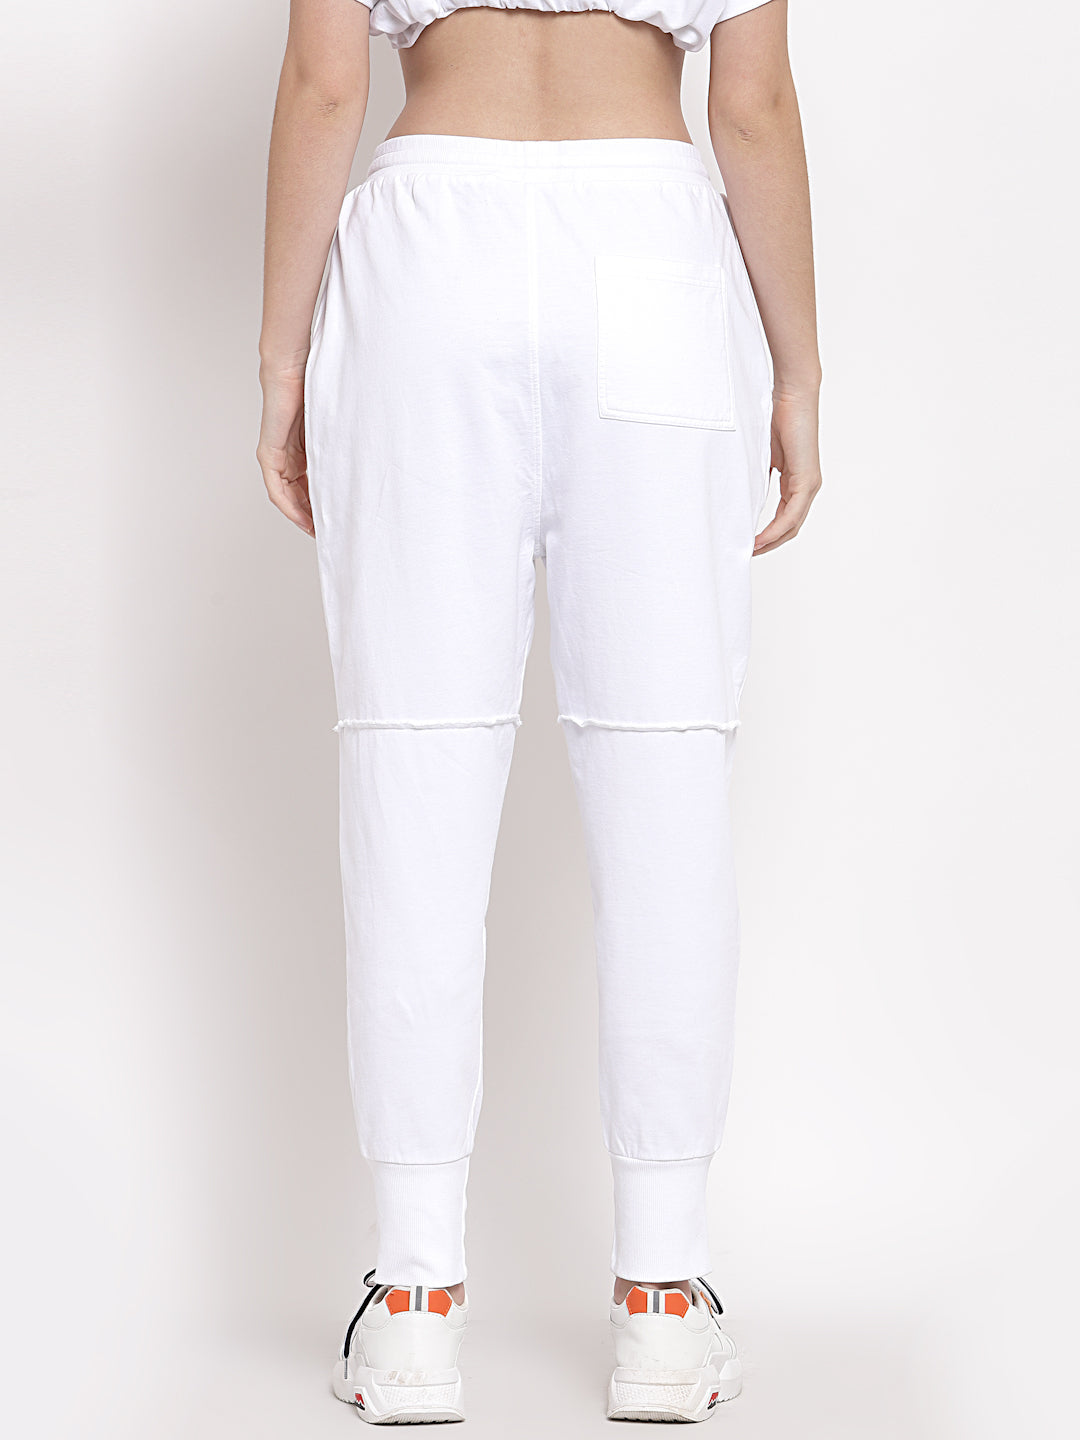 Ghost White Storm Joggers